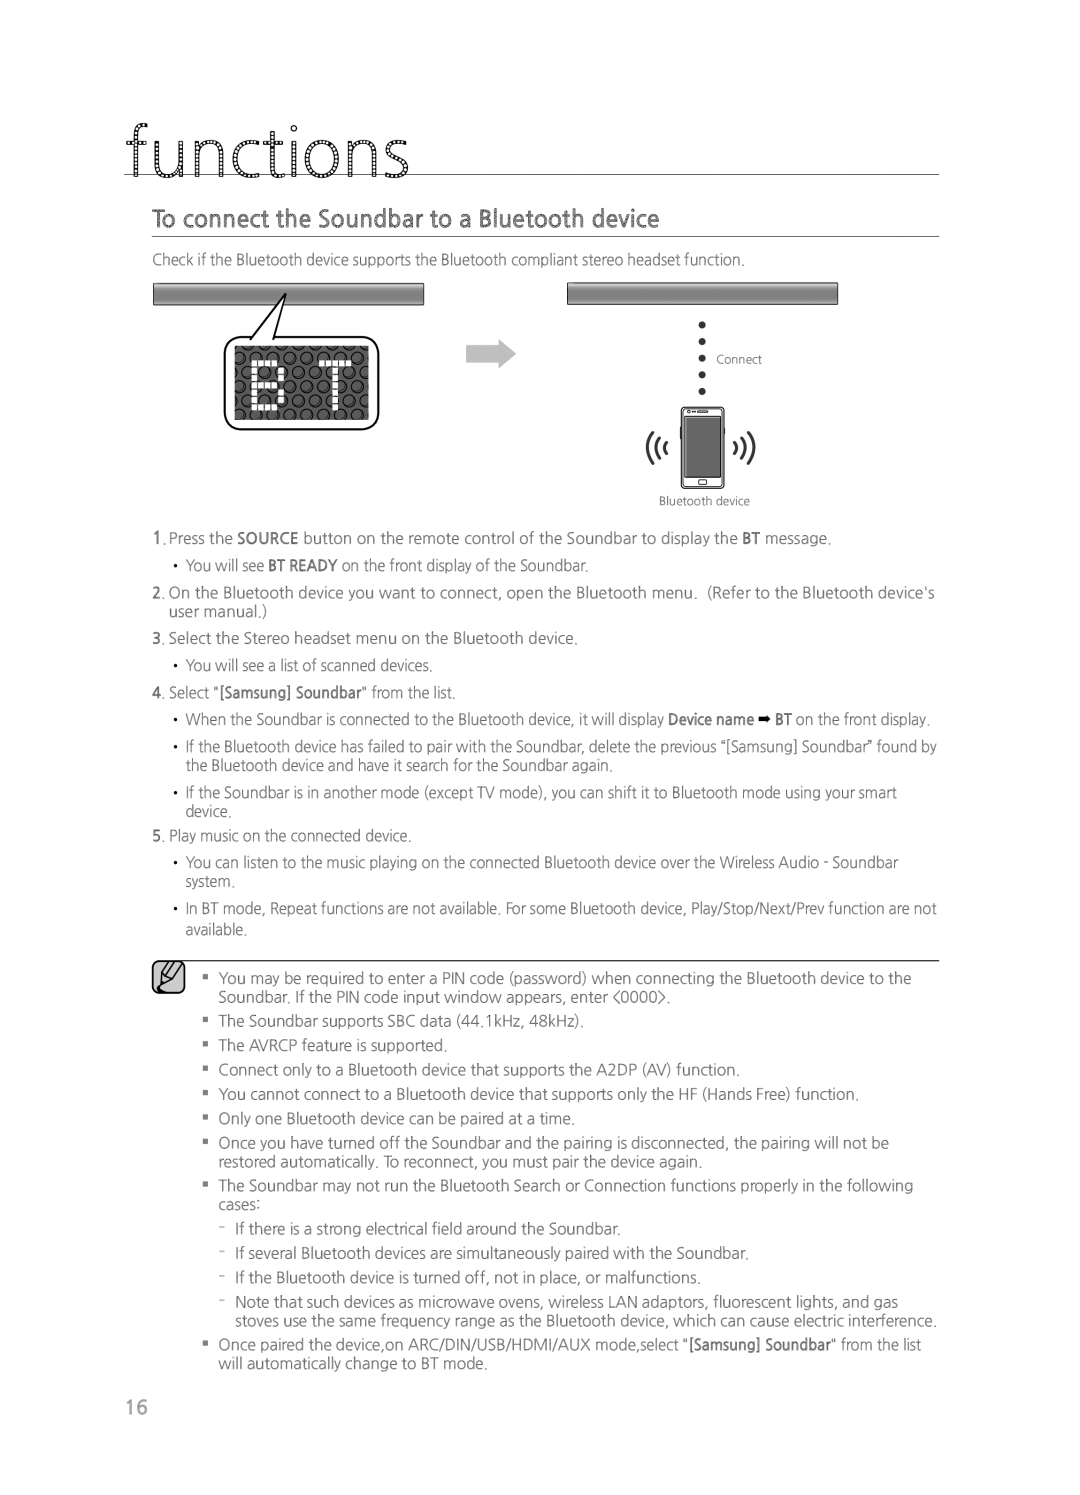 Samsung HWH550, HWH551, HW-H550/ZA, HW-H551/ZA user manual To connect the Soundbar to a Bluetooth device, functions 